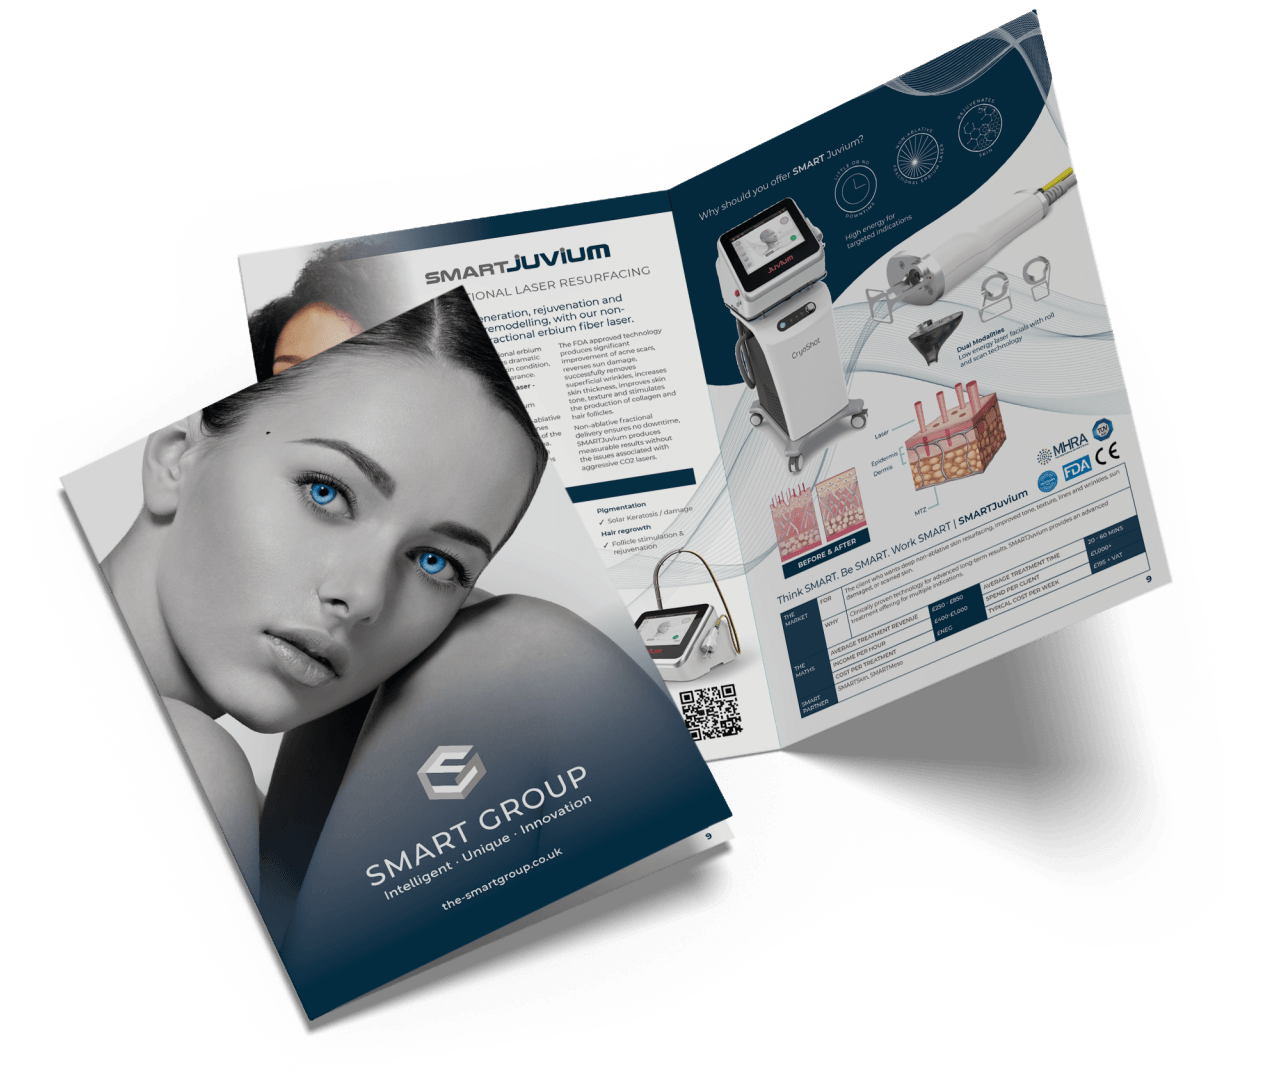 A smart group brochure with a woman 's face on it